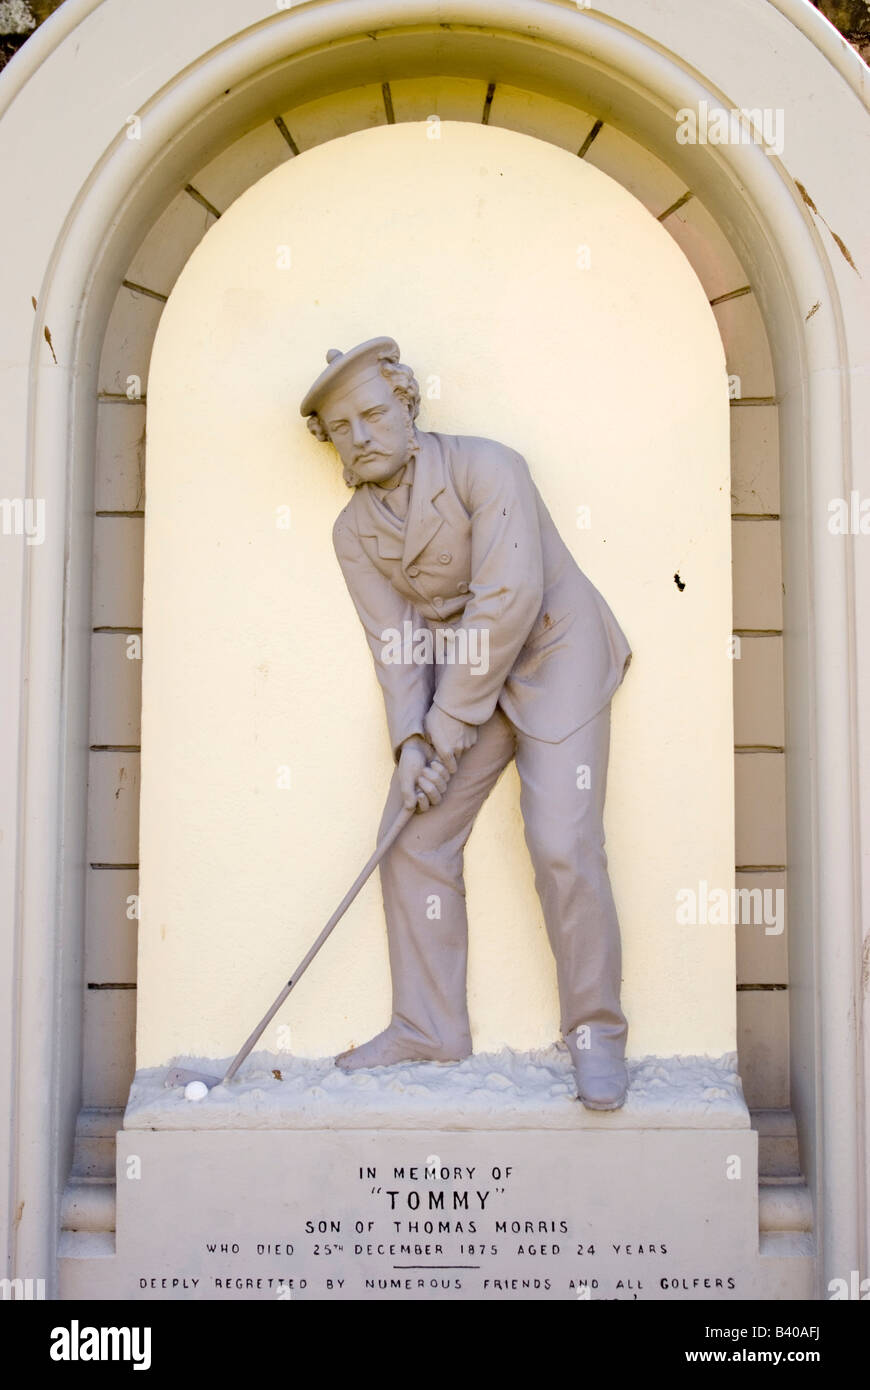 Tom morris grave High Resolution Stock Photography and Images - Alamy